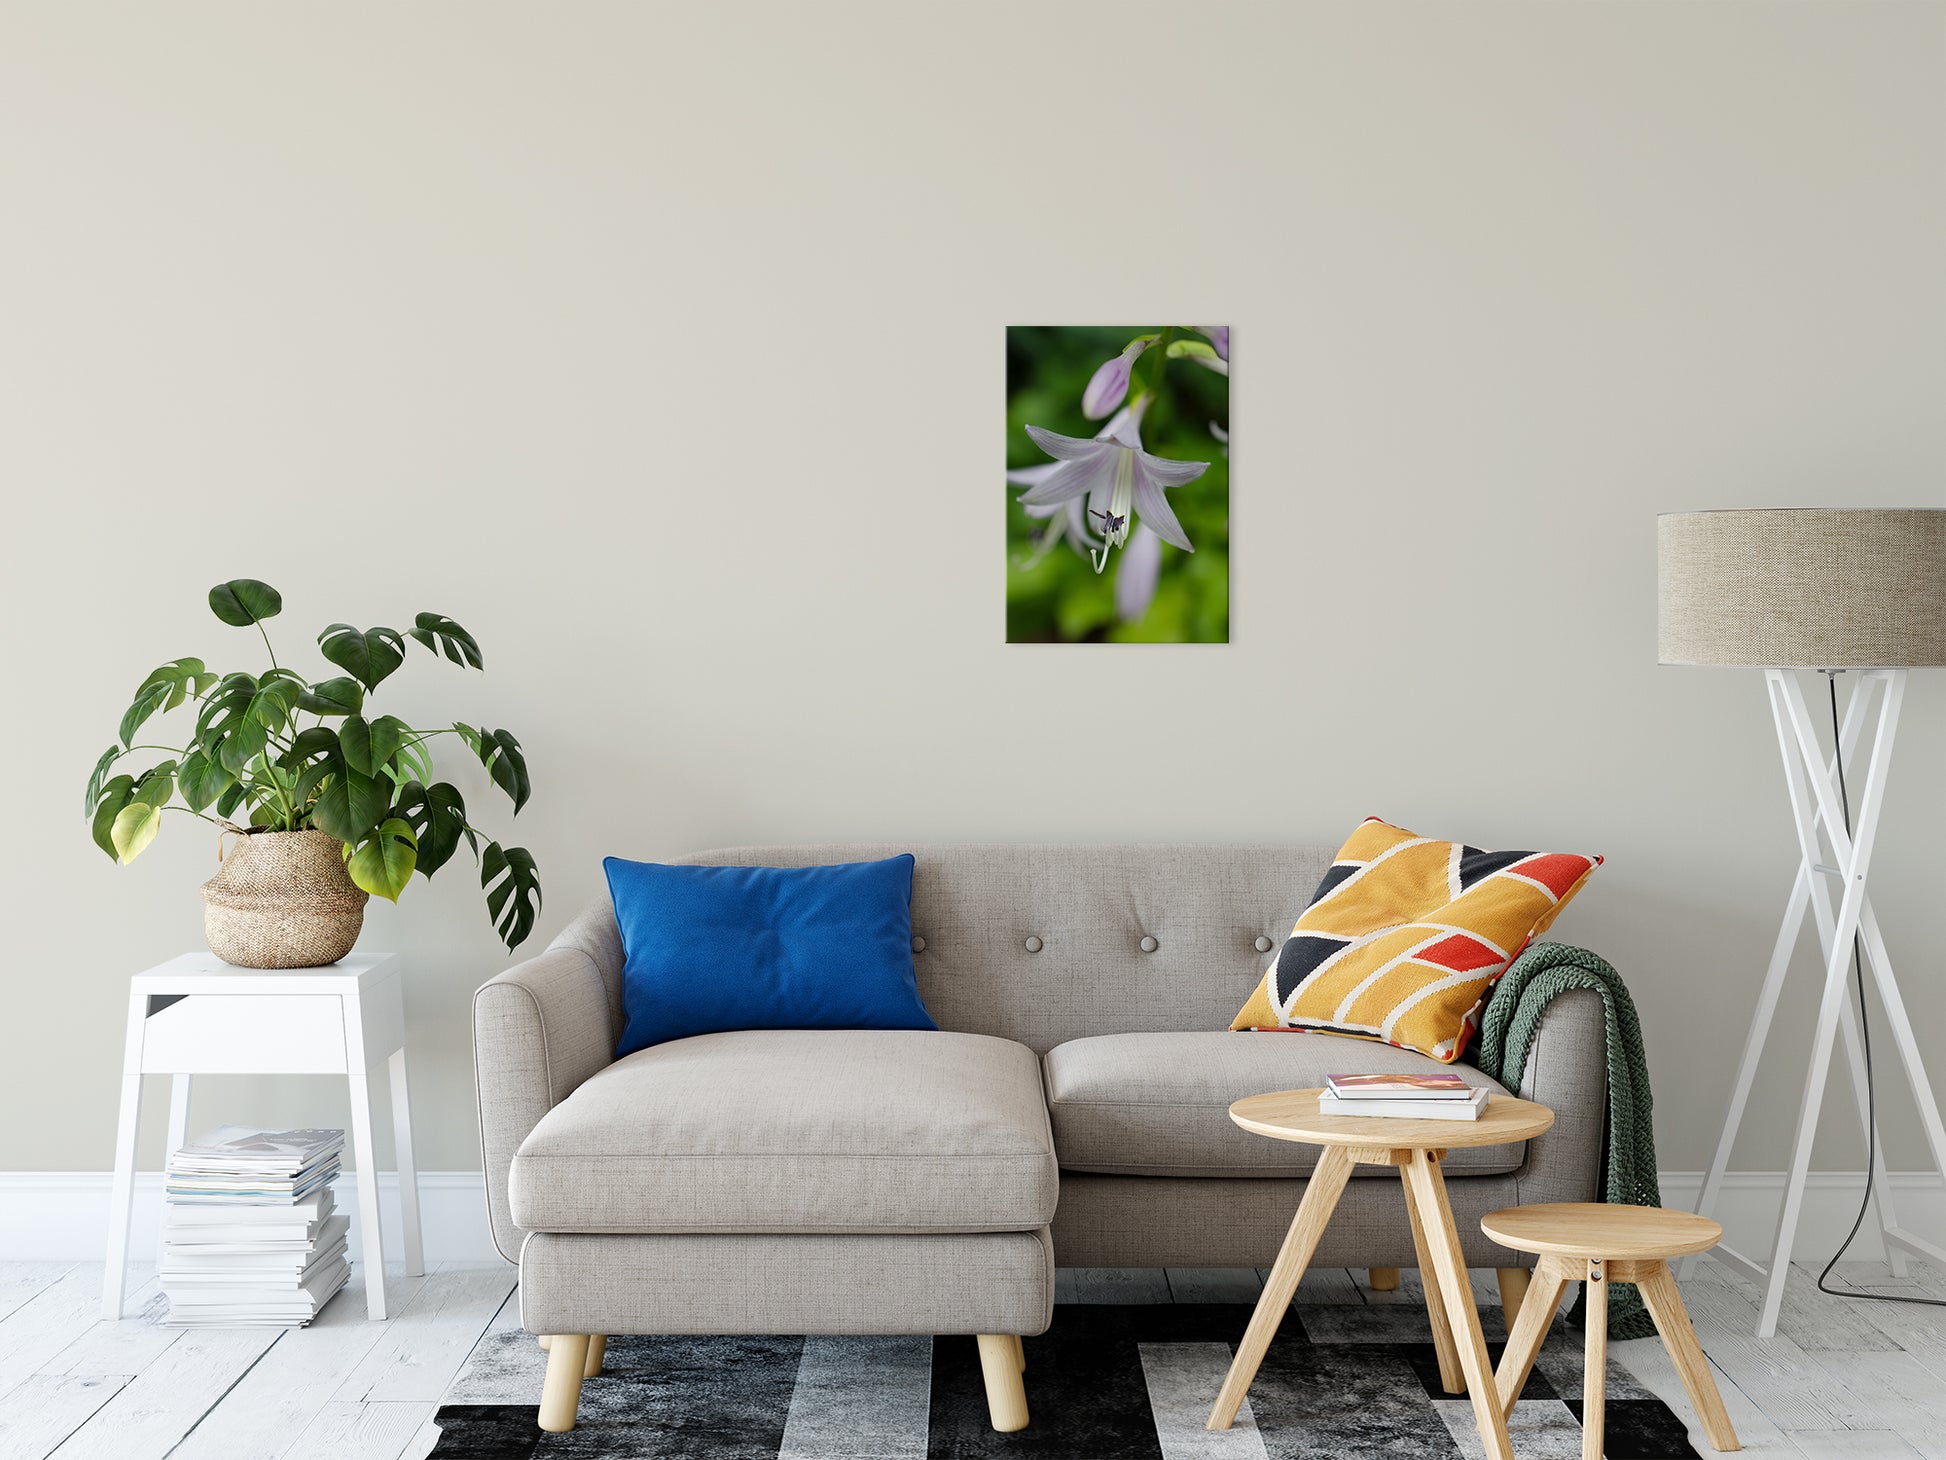 Hosta Bloom Nature / Floral Photo Fine Art Canvas Wall Art Prints 16" x 20" - PIPAFINEART